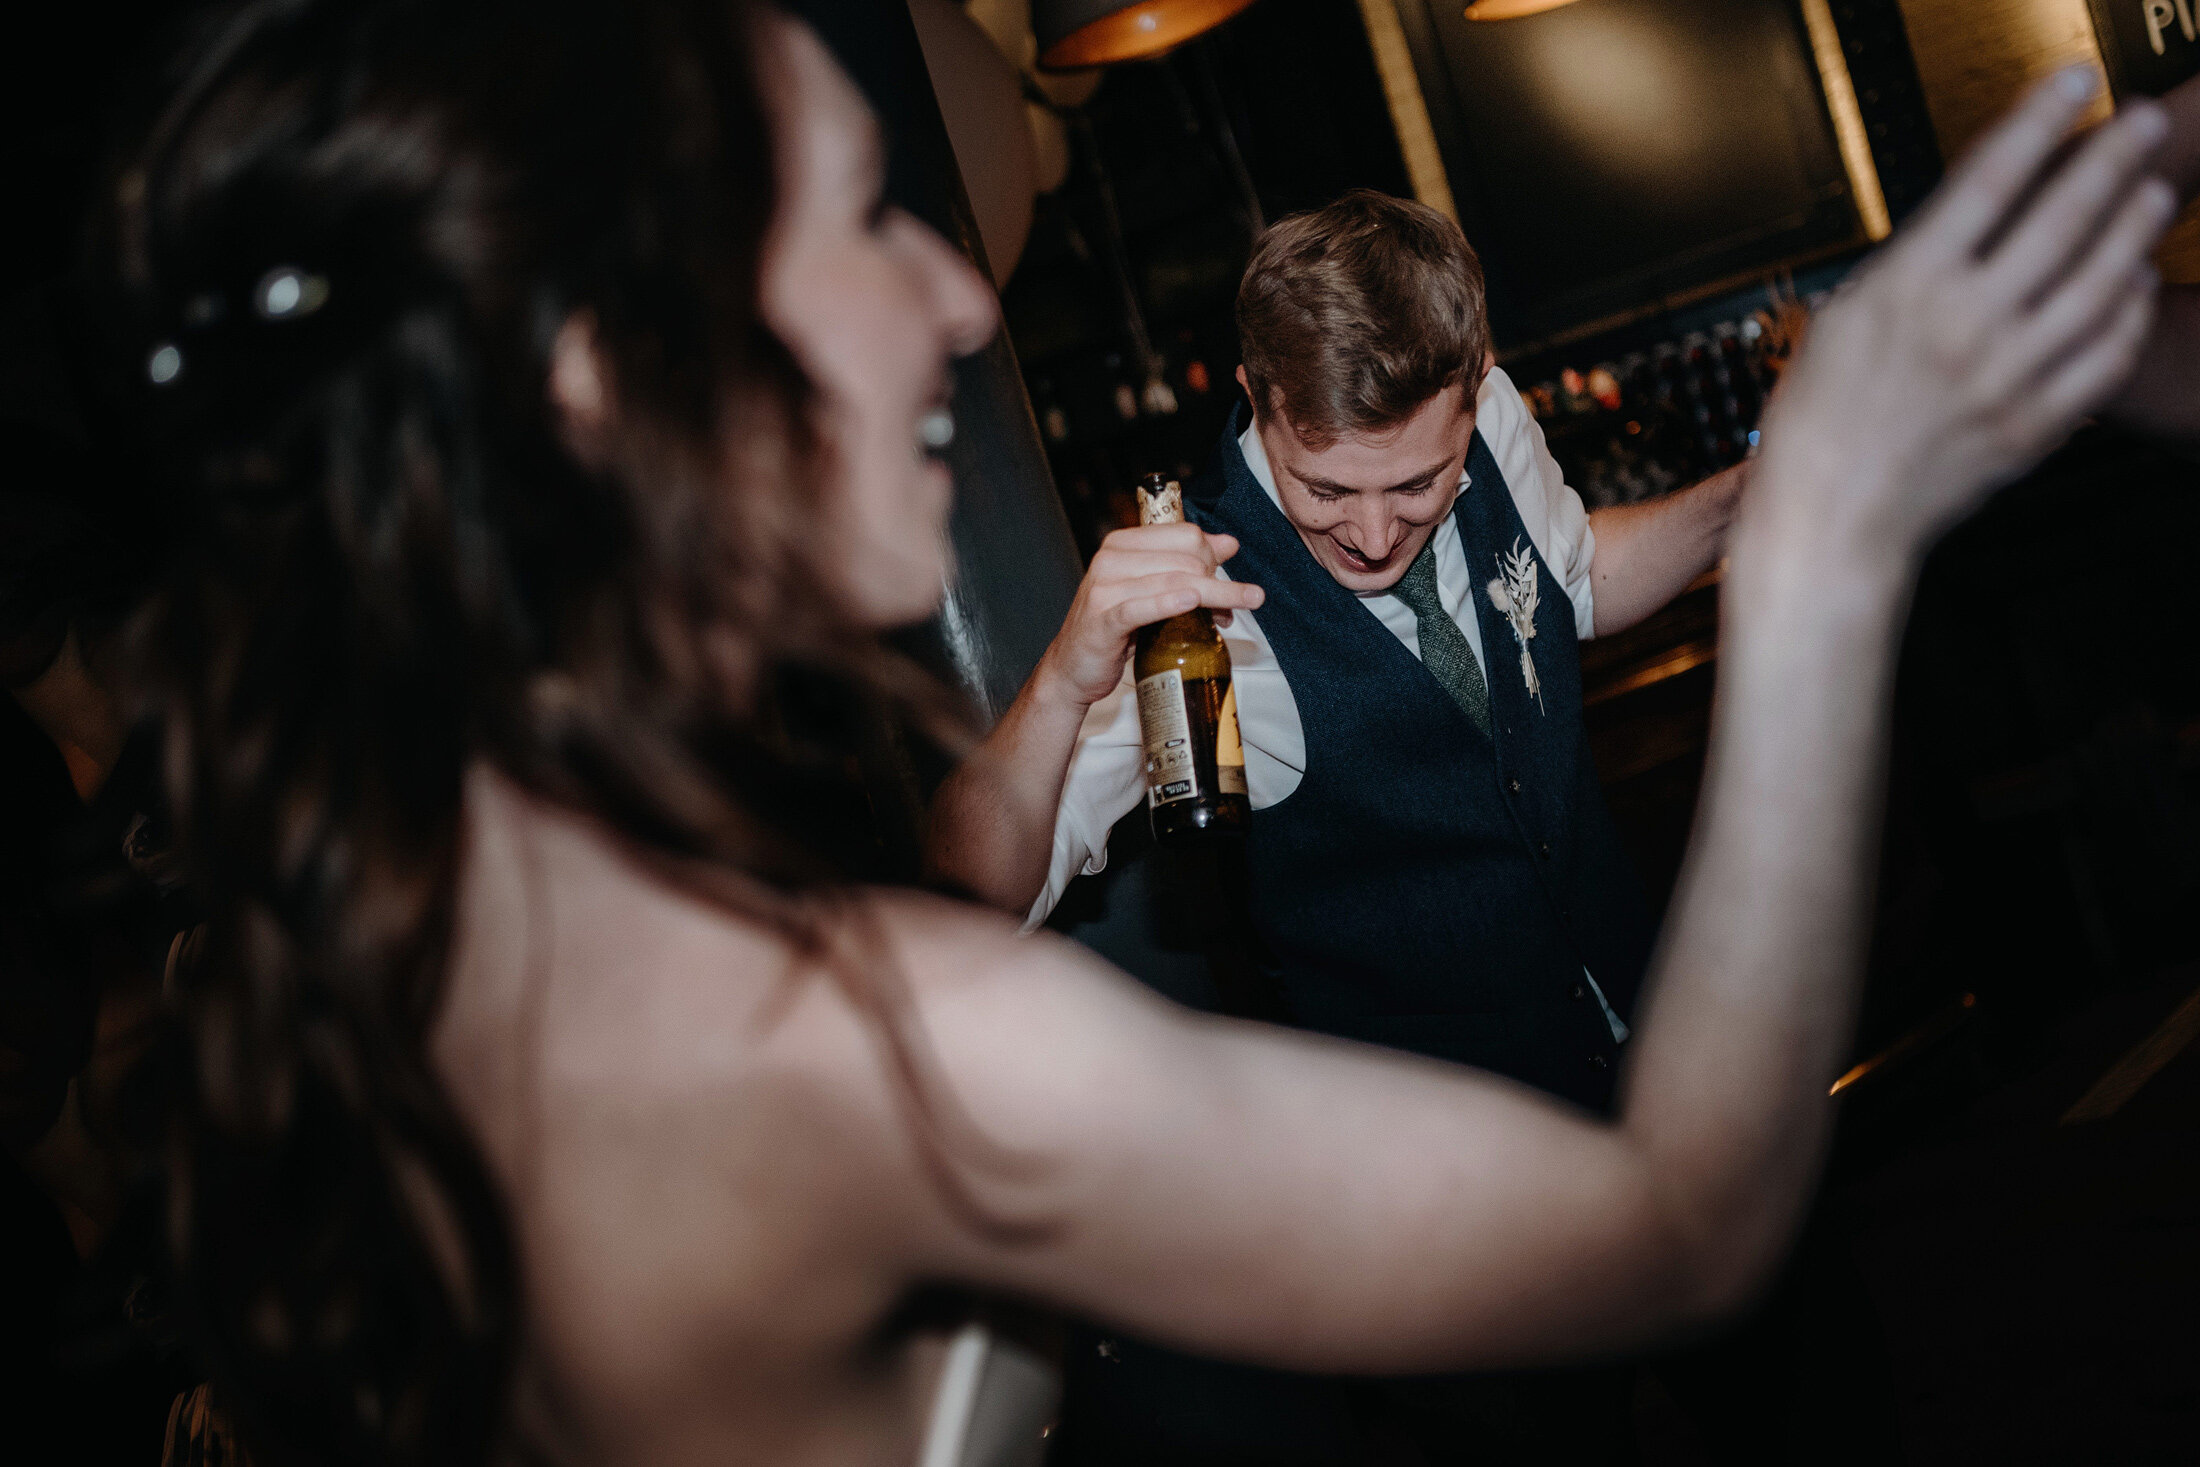 The Depot N7 wedding photography